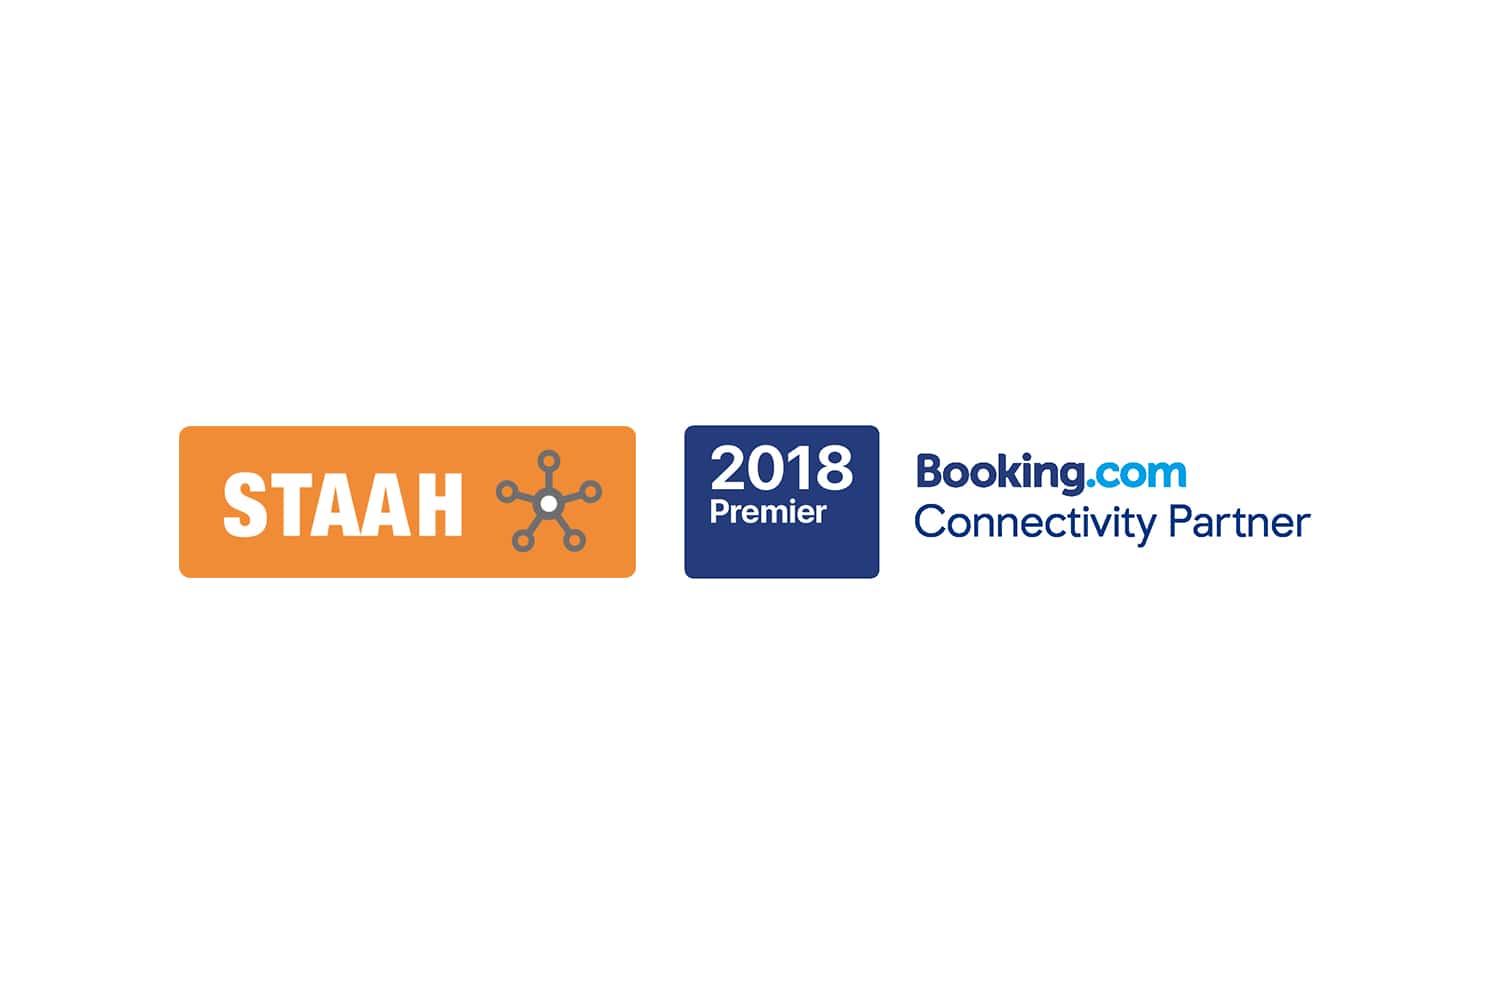 STAAH & Booking.com